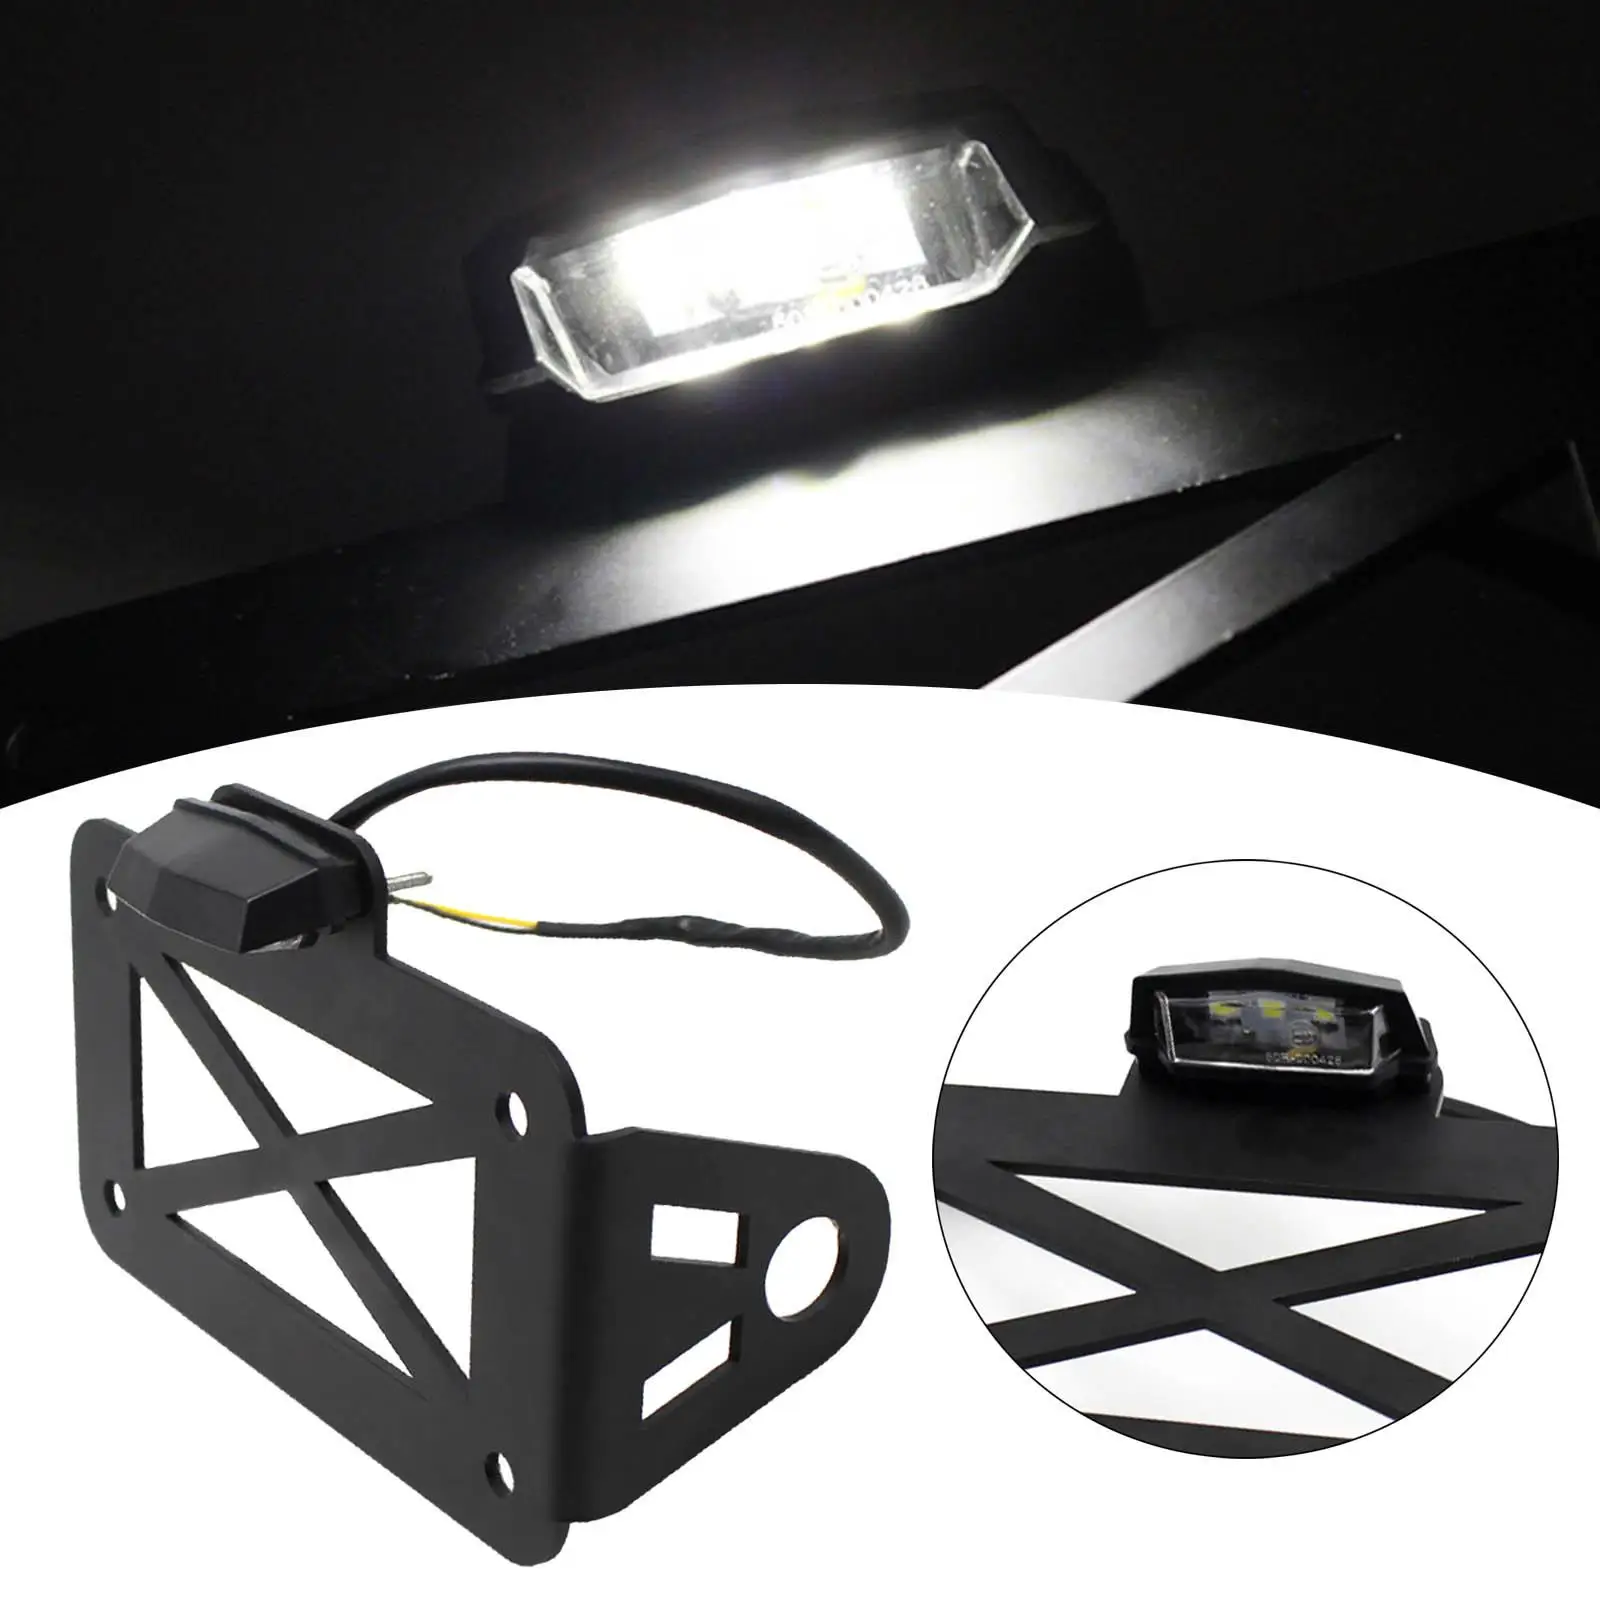 W/ LED Motorcycle License Plate Bracket Side Mount for Cruisers Stainless Steel License Plate Mount Fit for Motorbike Parts